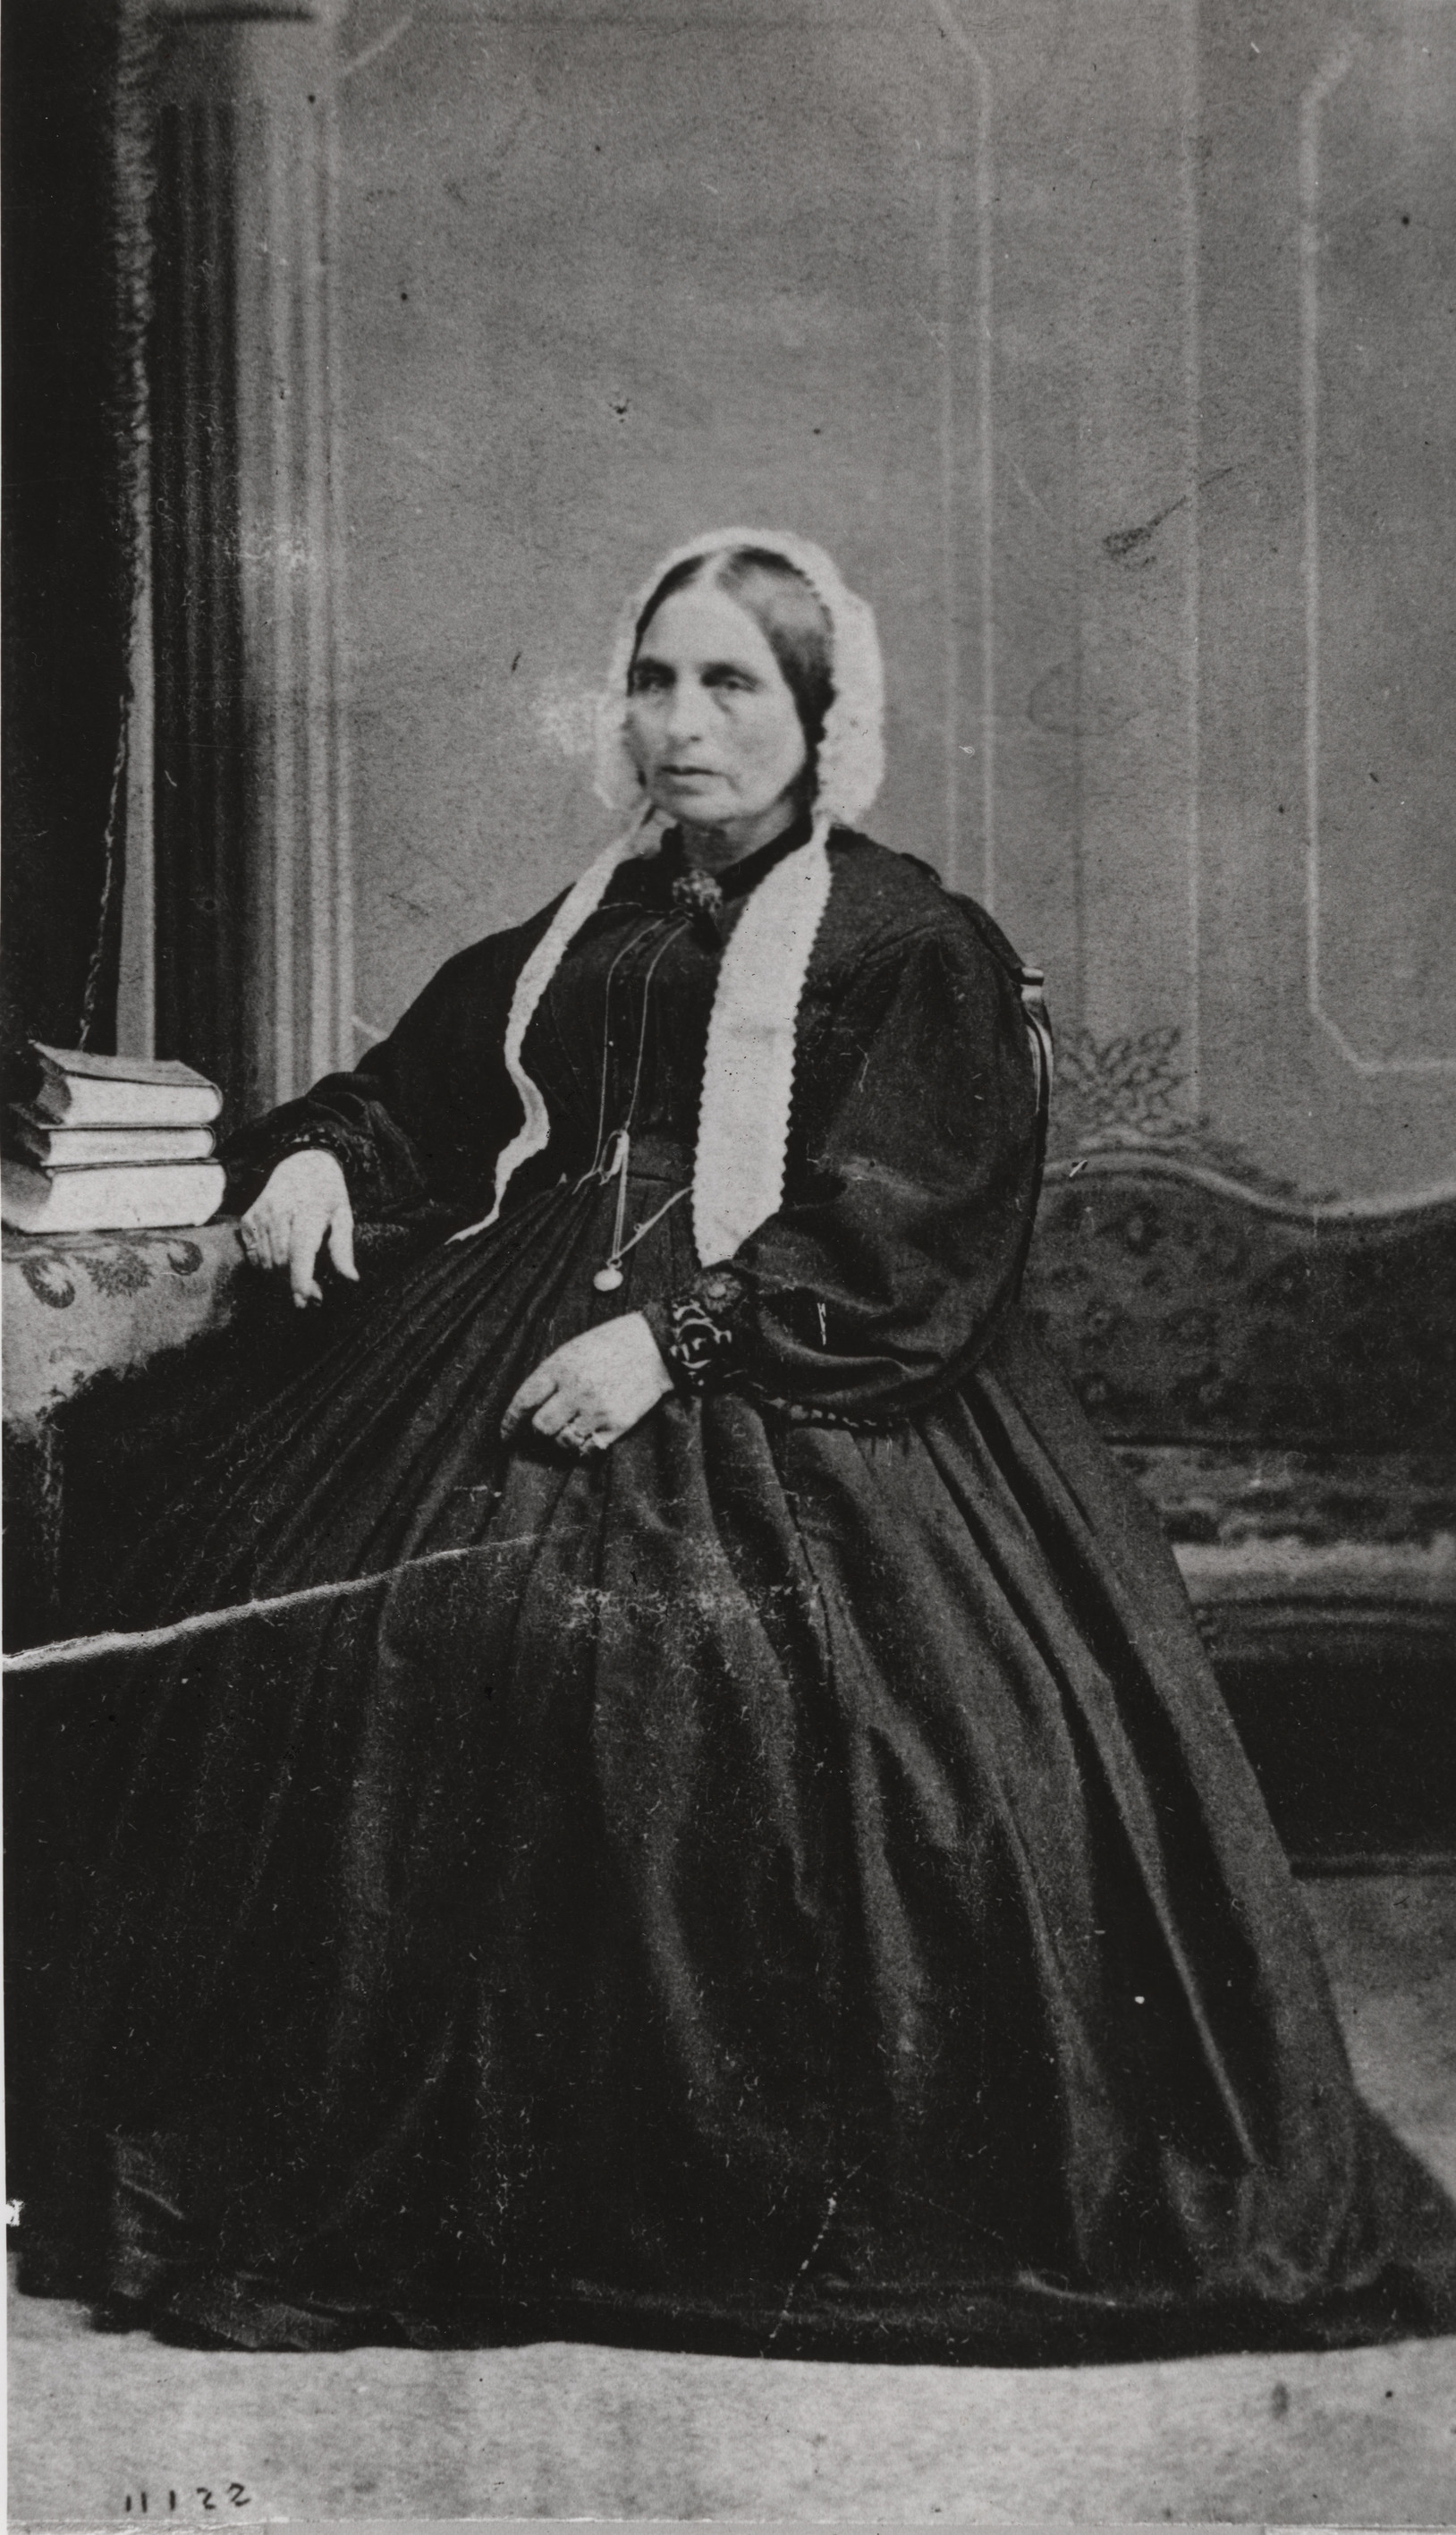 Black and white photograph of a seated woman in floor length black dress with wide skirt